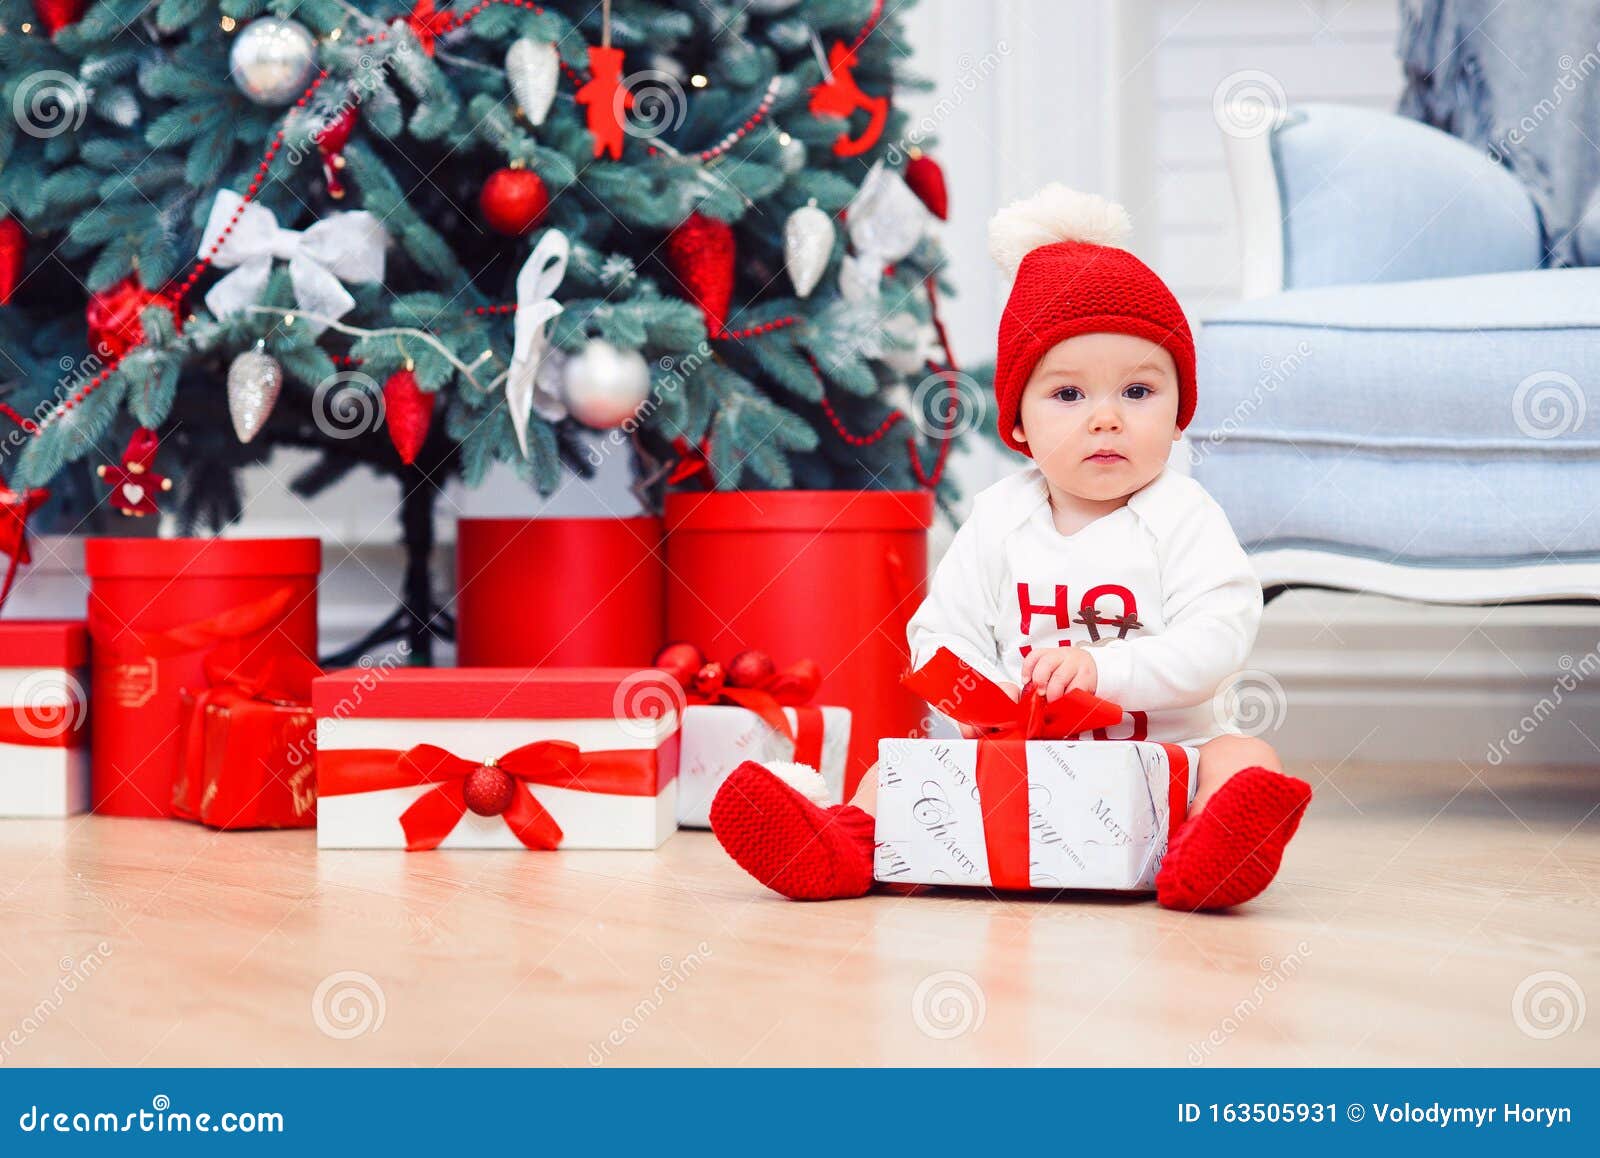 Baby Unpack Gift Boxes with Christmas Decoration, Dressed As Santa ...